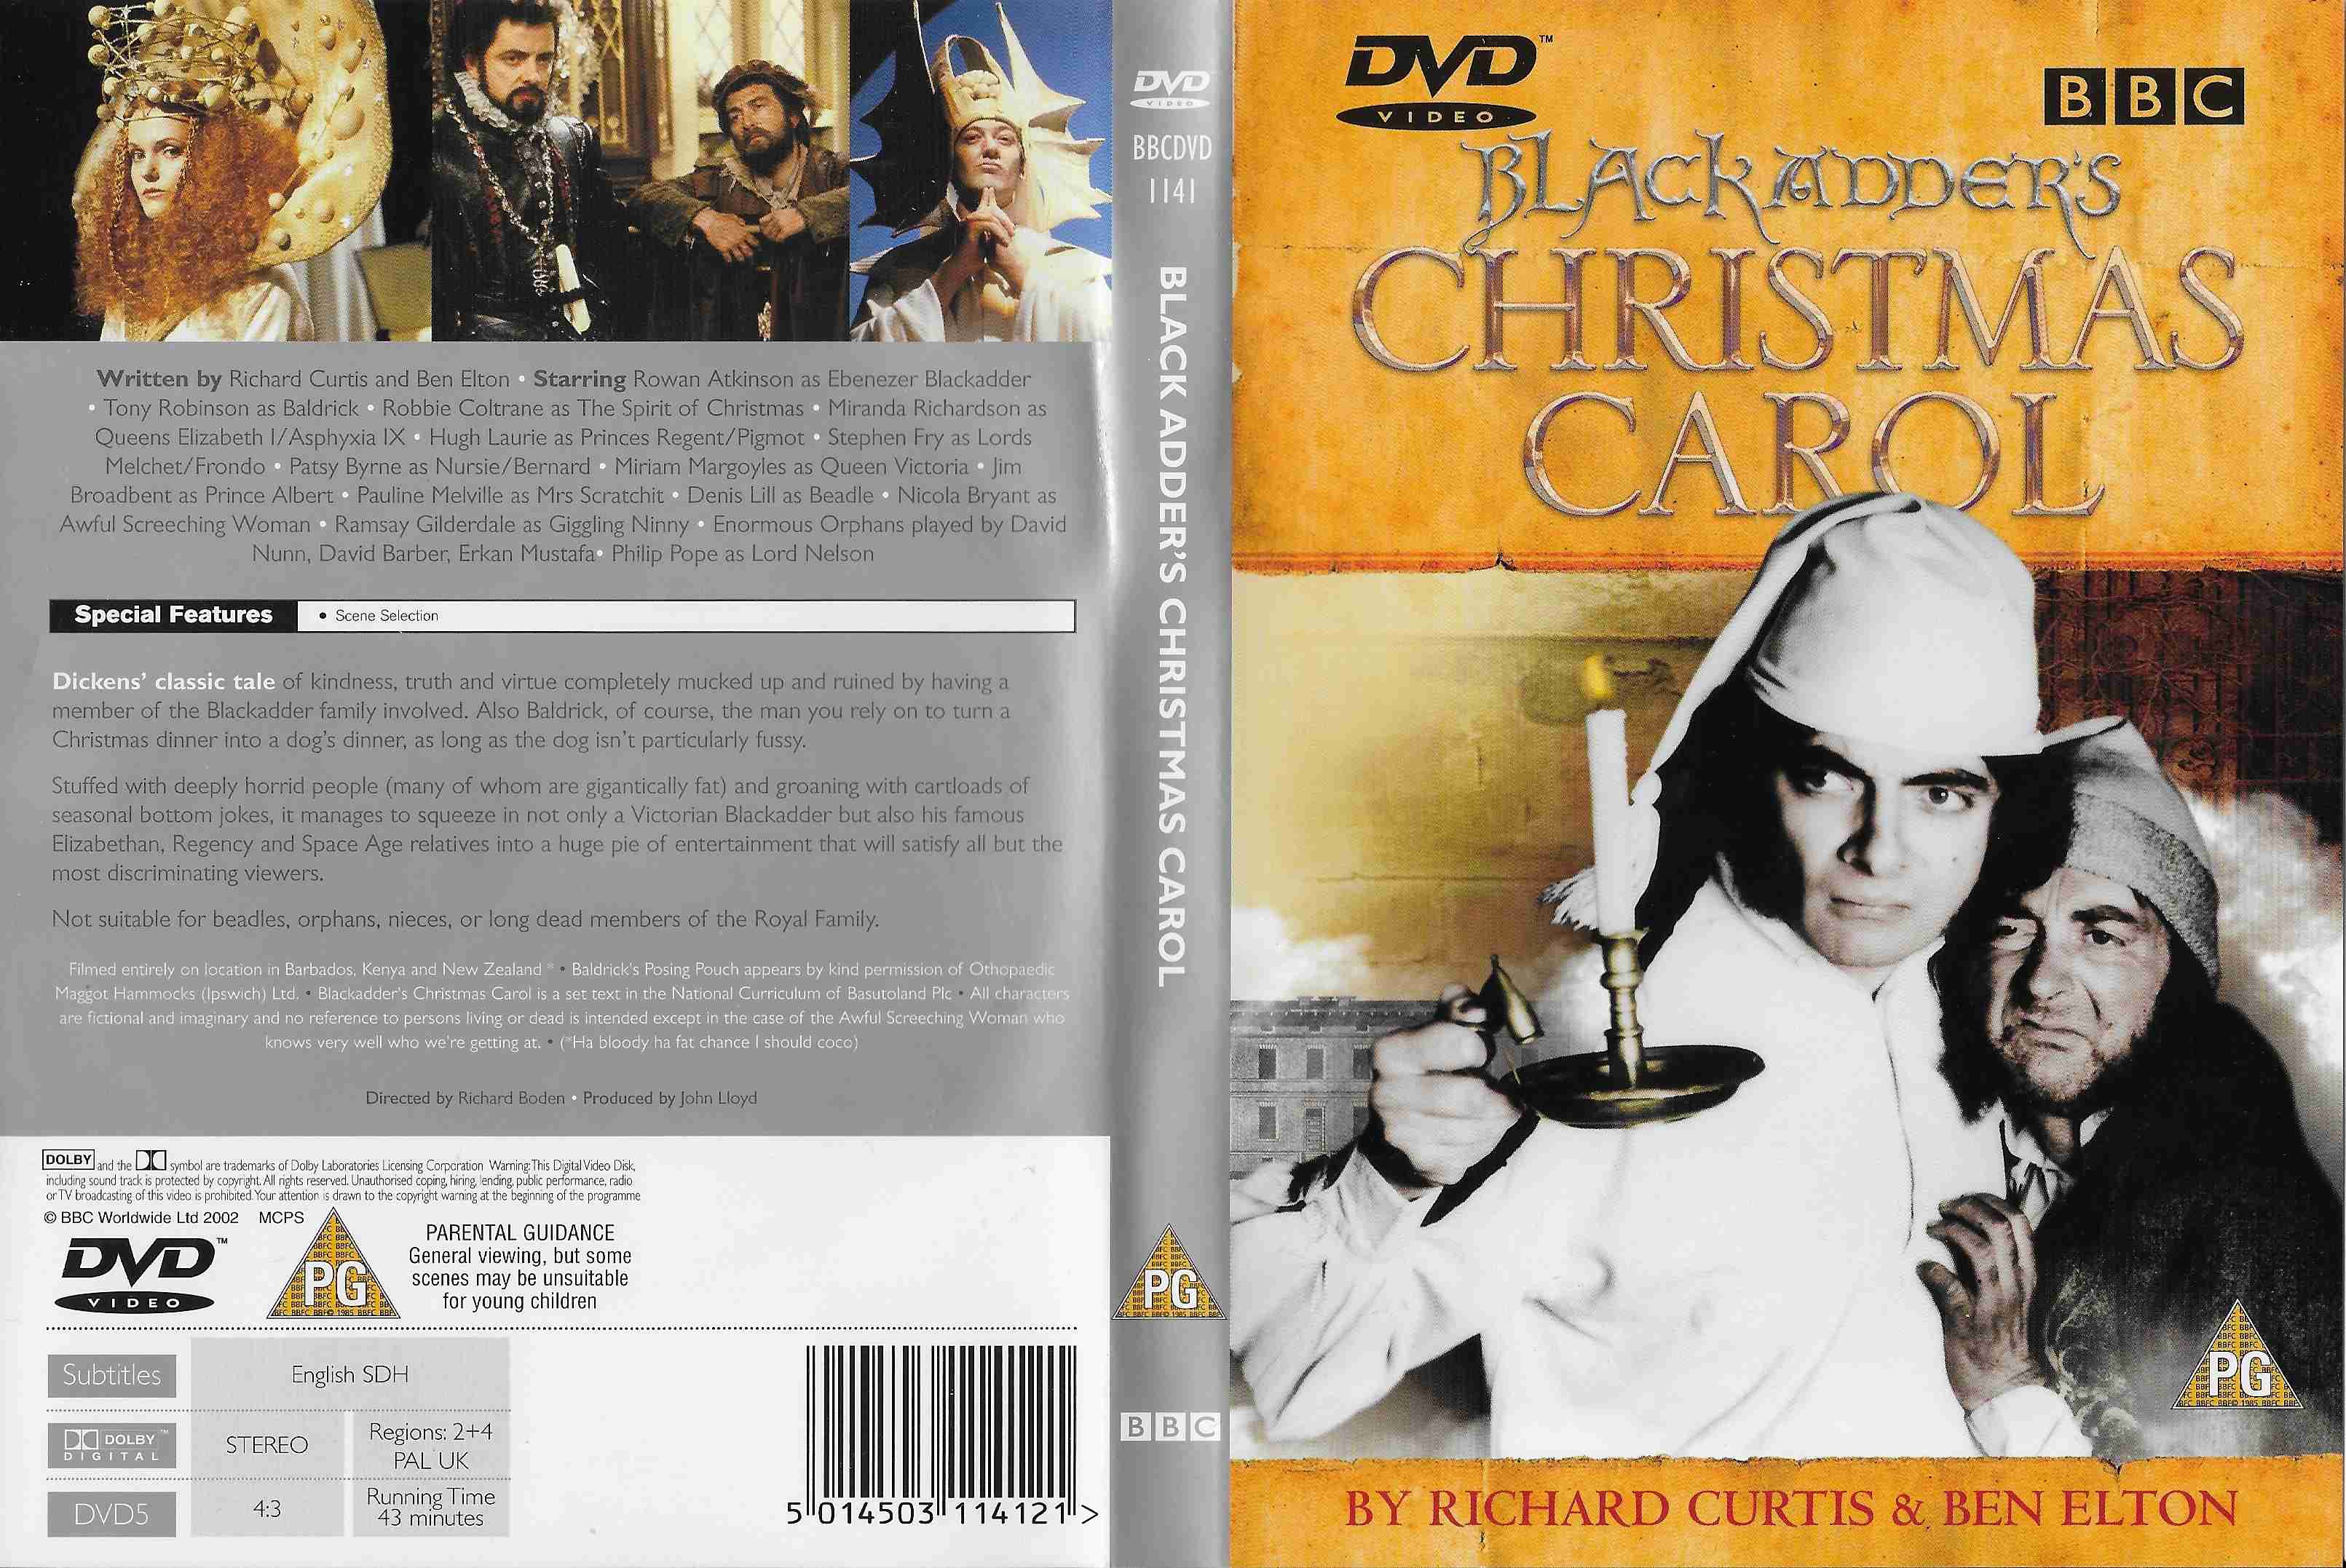 Picture of BBCDVD 1141 Black Adder's Christmas carol by artist Richard Curtis / Ben Elton from the BBC records and Tapes library